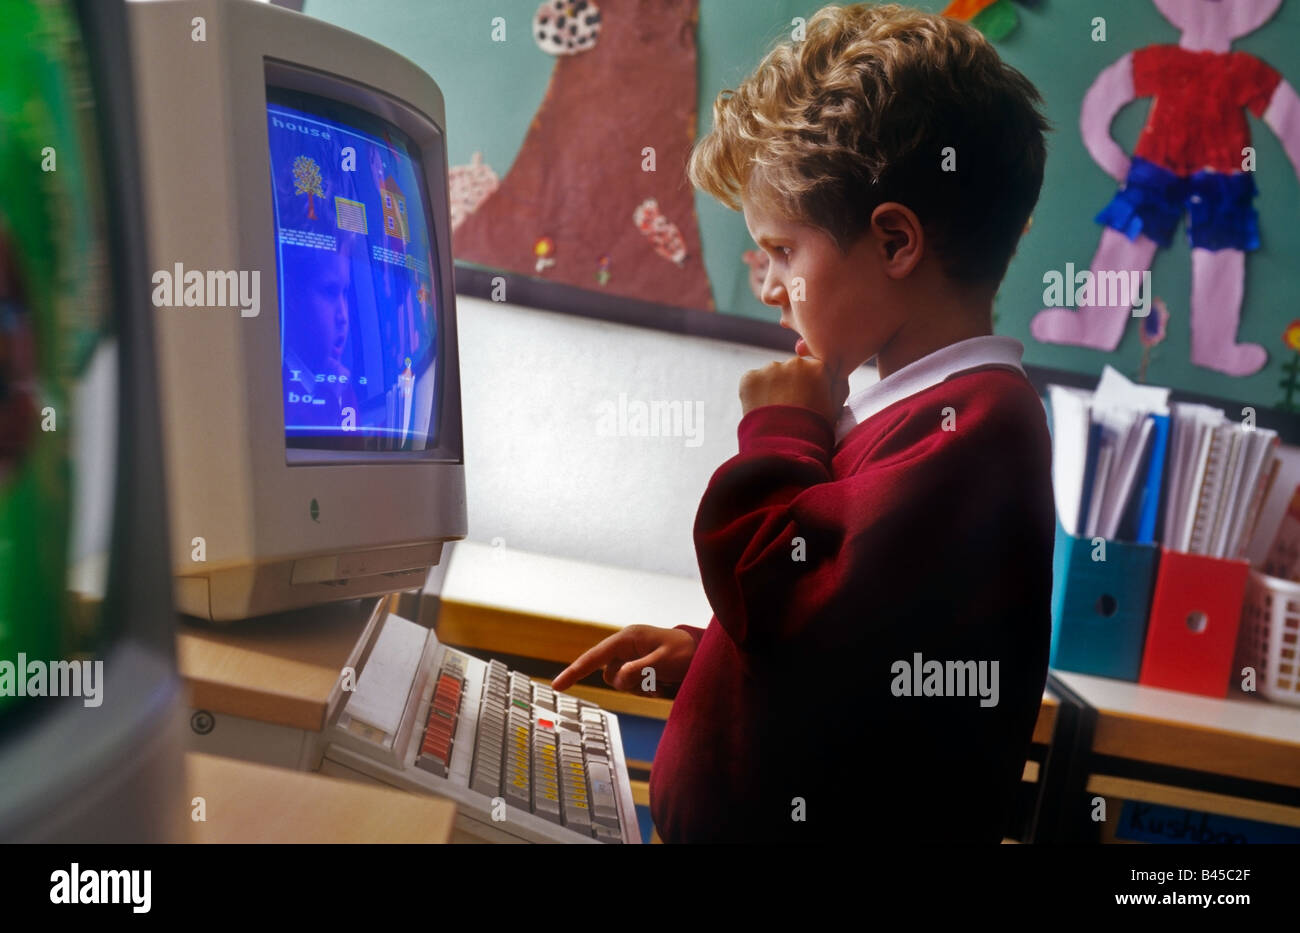 Infant school boy in class room aged 4 to 6 years looks at computer screen to identify and learn screen displayed object names Stock Photo